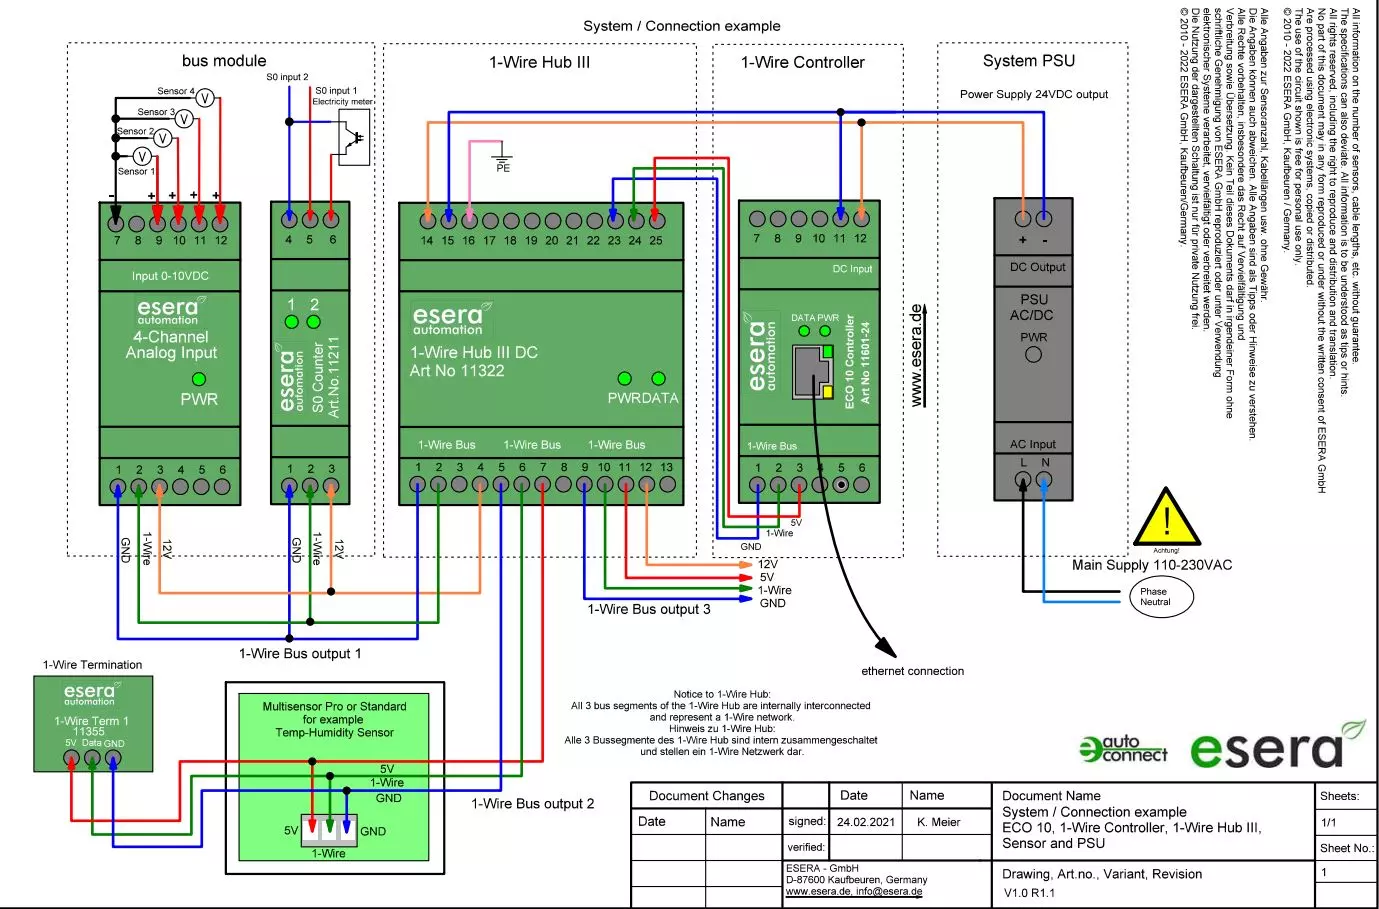 ECO 10 1-Wire Controller, intelligent system interface